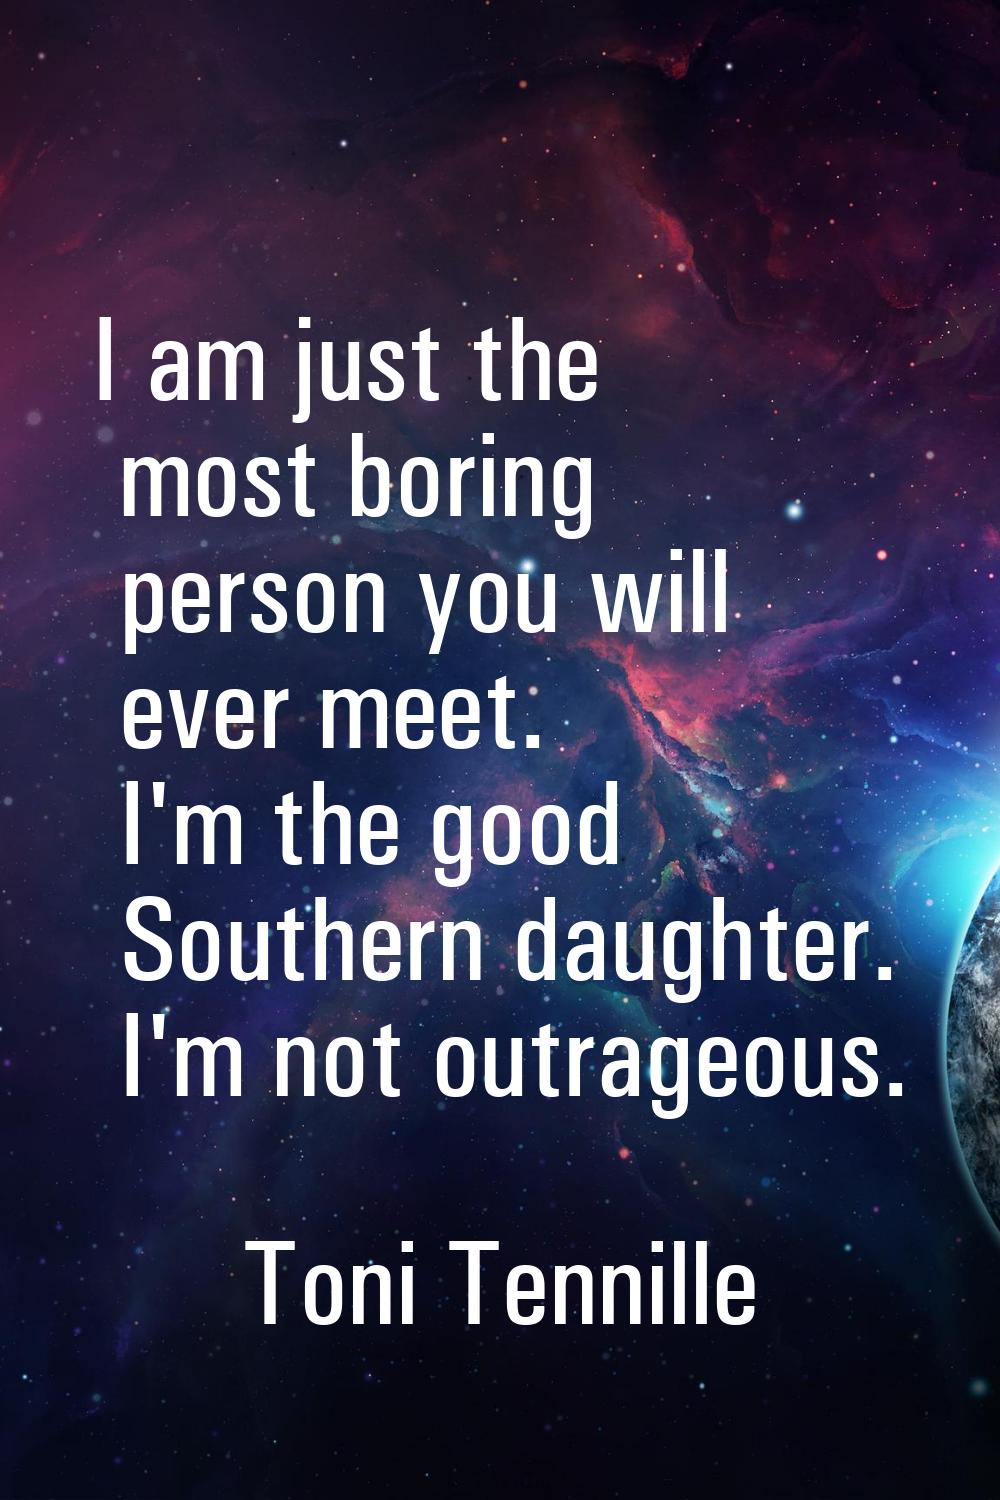 I am just the most boring person you will ever meet. I'm the good Southern daughter. I'm not outrag